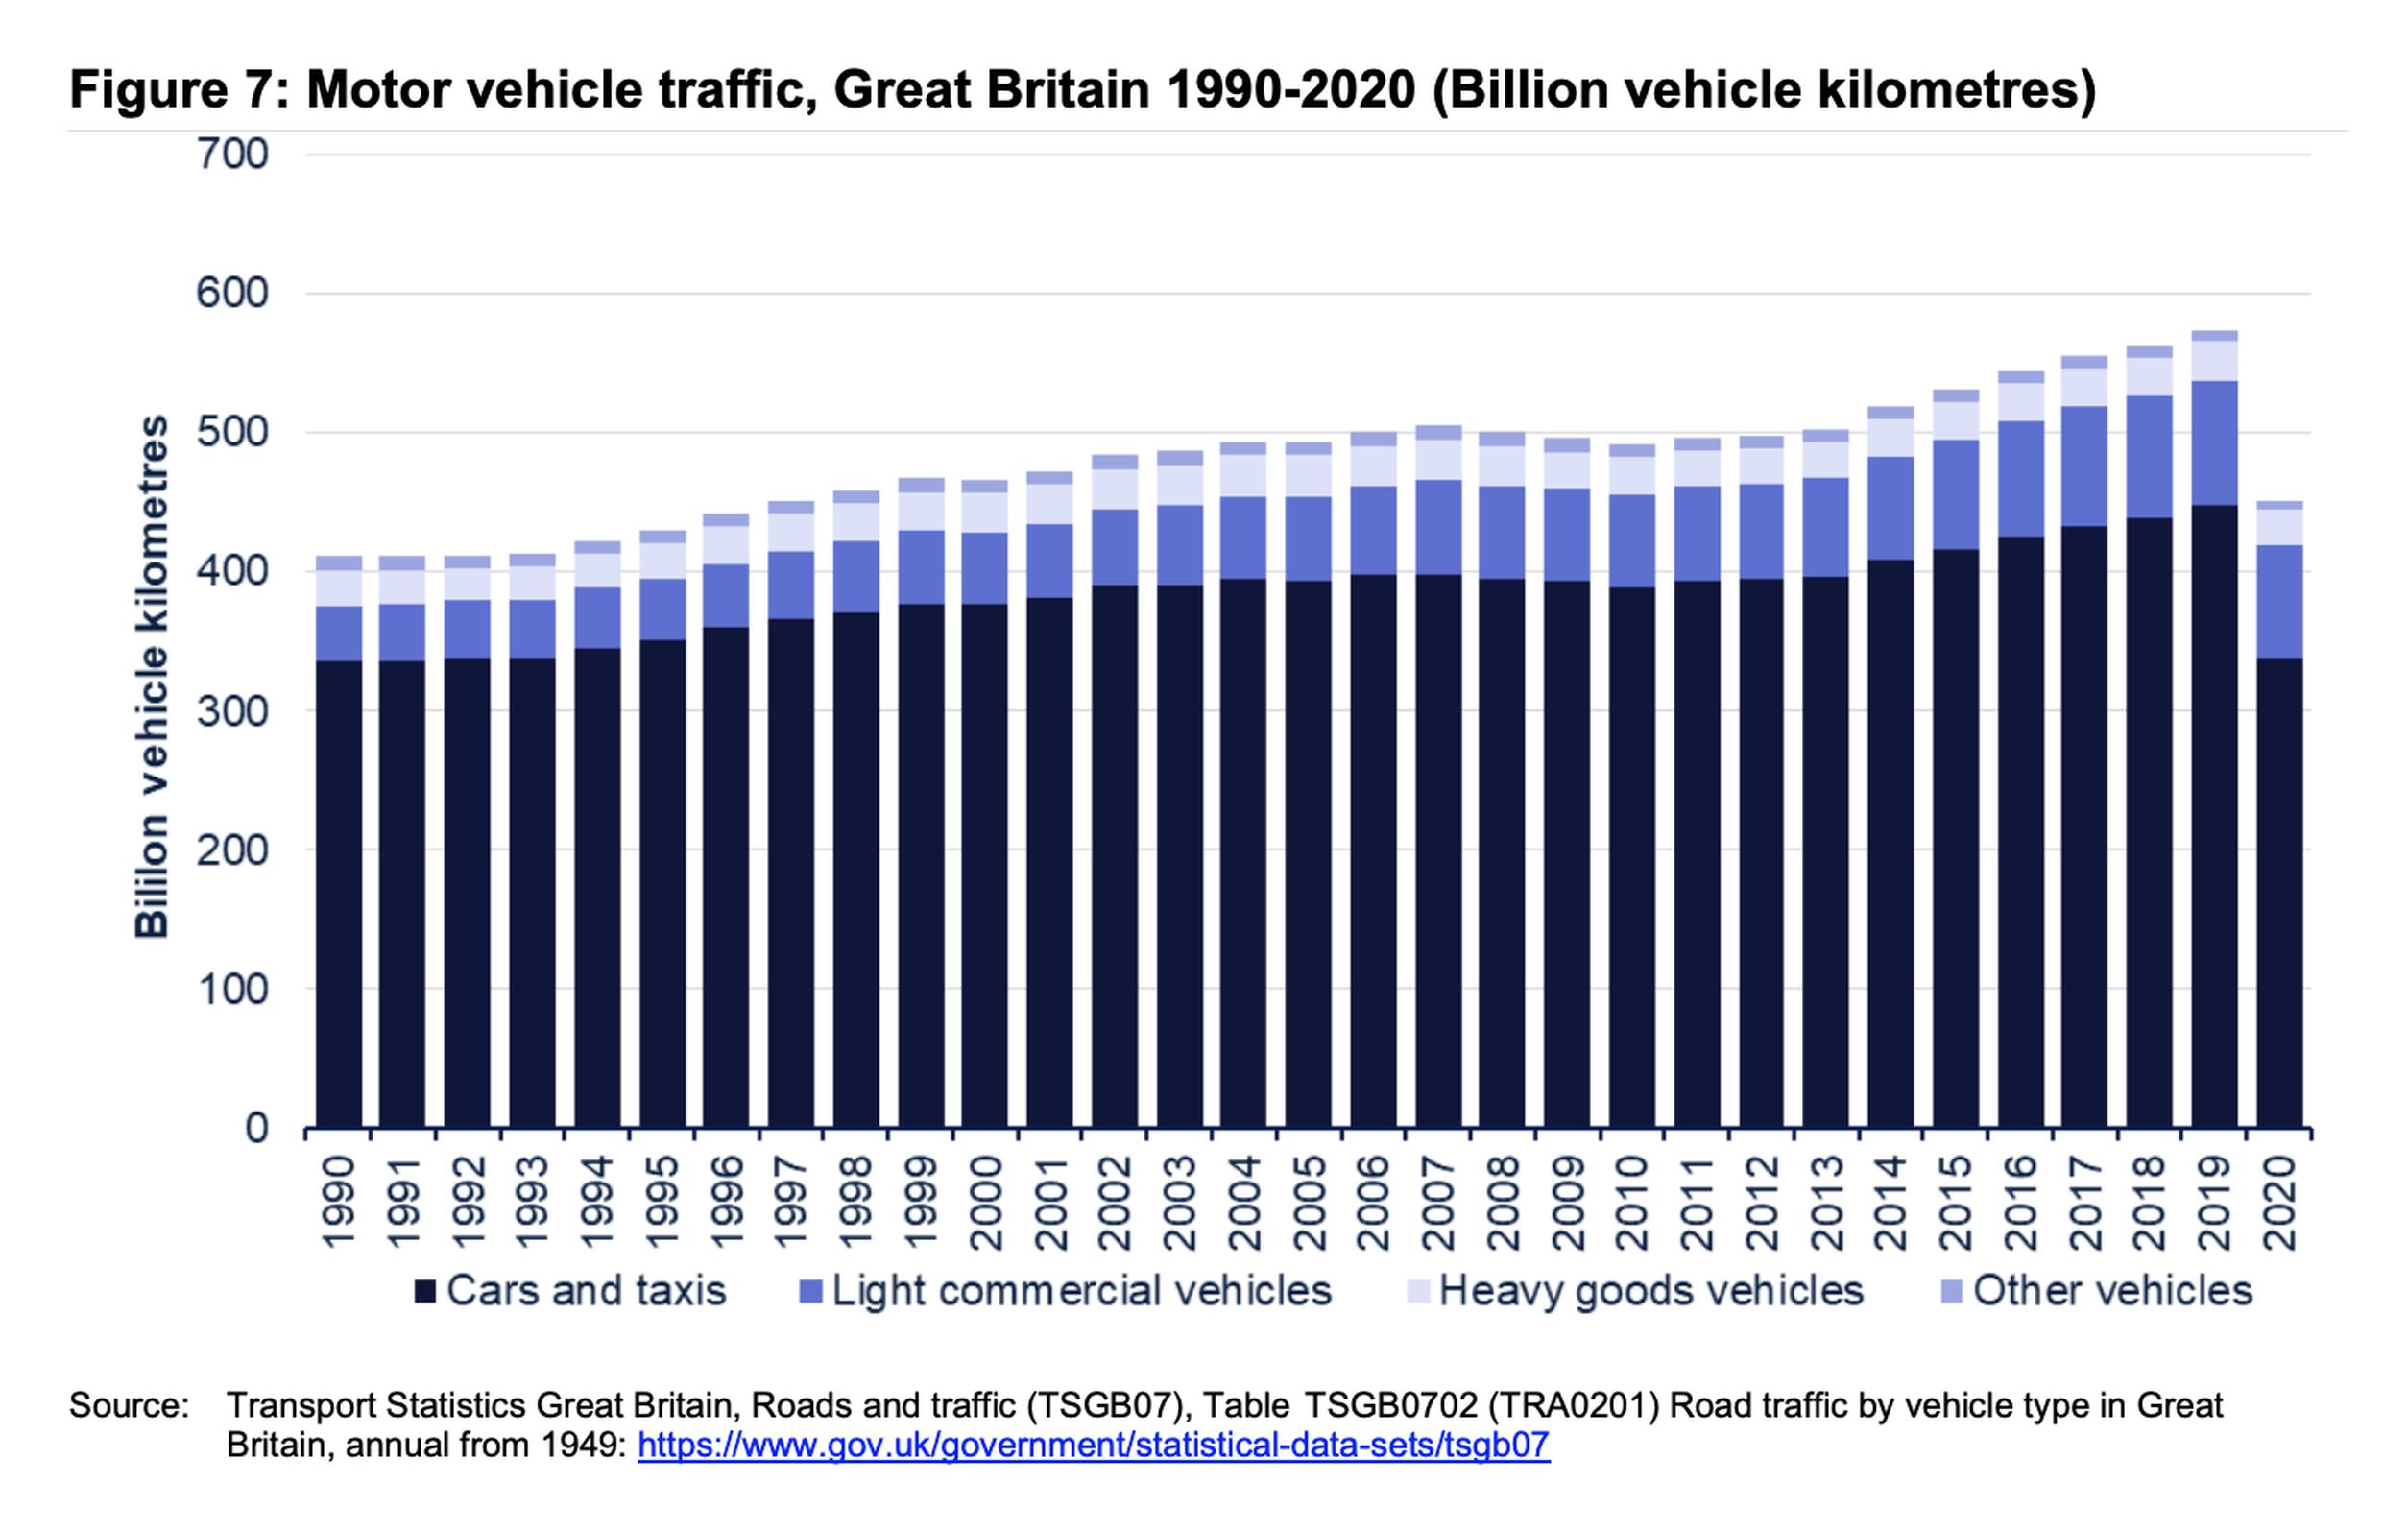 Figure 7 shows how the volume of traffic on the roads has changed over time in Great Britain, which reflects the trend seen for the UK as a whole